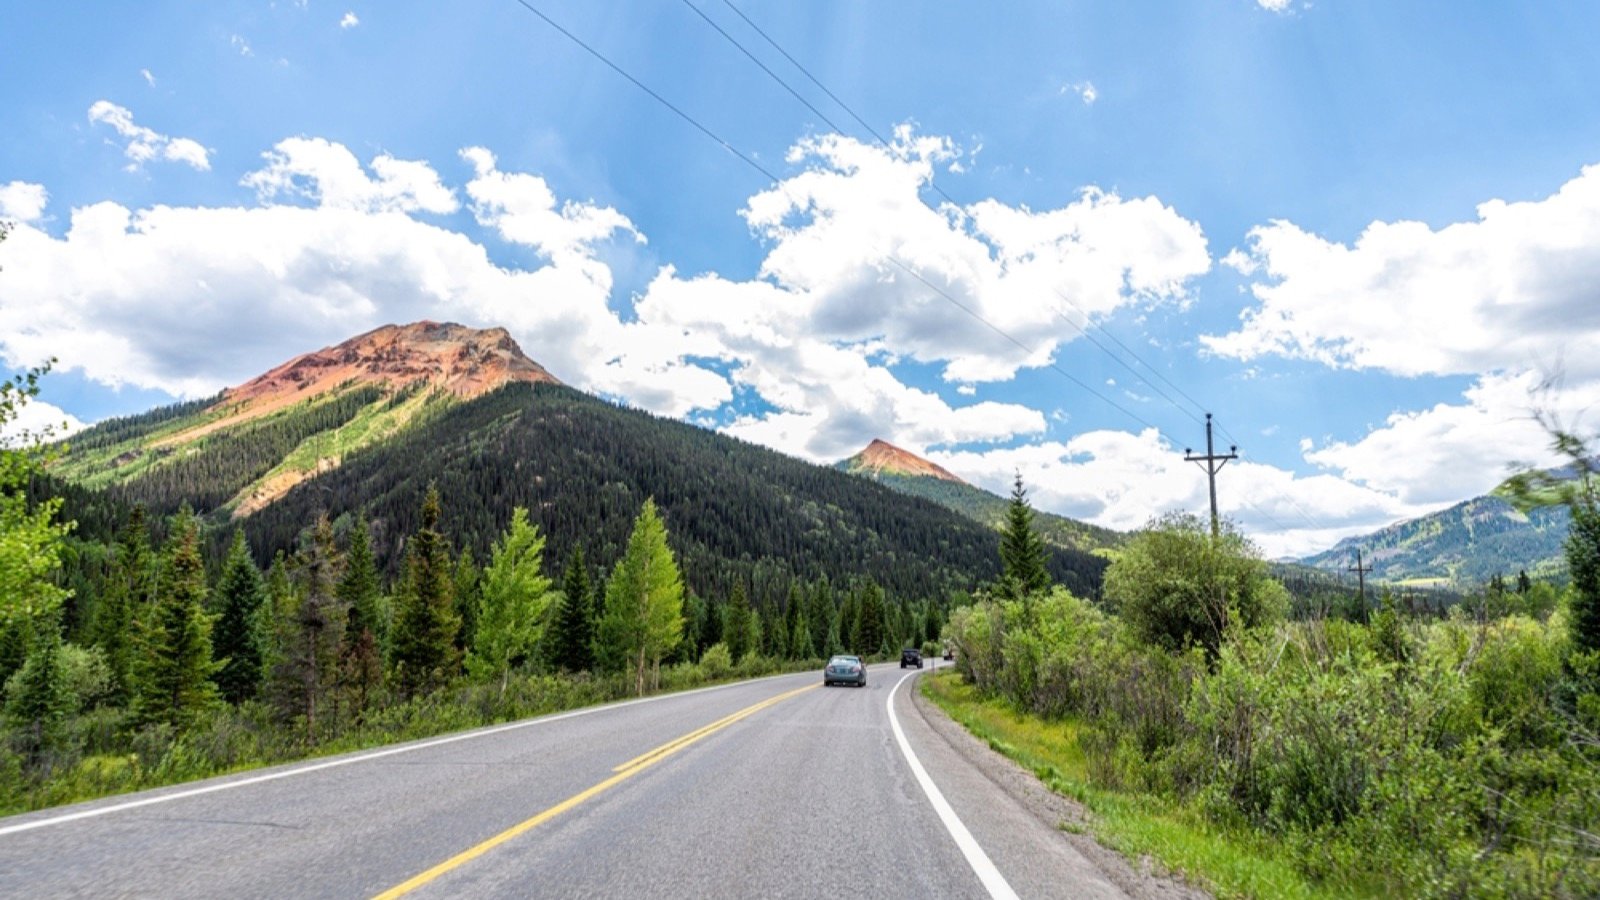 <p>While the Million Dollar Highway in Colorado is only 25 miles long, the frequent hairpin curves mean it takes over an hour to drive. Those who don’t have to concentrate on managing the turns can enjoy stunning views of the San Juan Mountains.</p><p>You can also visit alpine lakes and historic mining towns. The Telluride Historic District, San Juan Skyway Scenic Byway, Black Canyon of the Gunnison, Ouray Ice Park, and Box Canyon Falls are a few experiences along the way.</p>